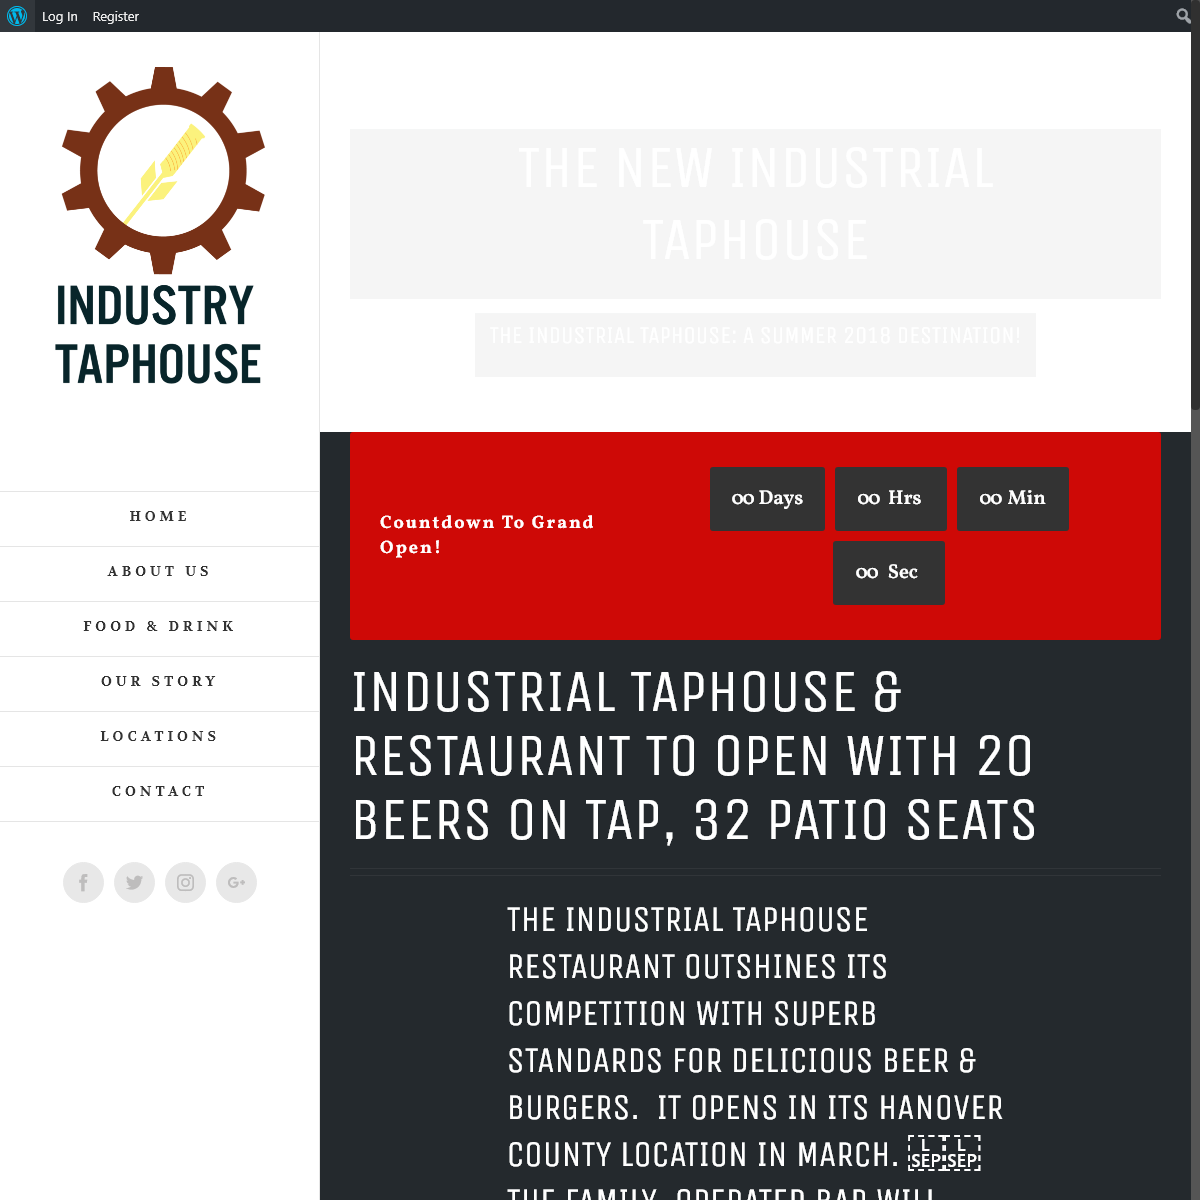 Industrial Taphouse â€“ Hanover`s Industrial Taphouse